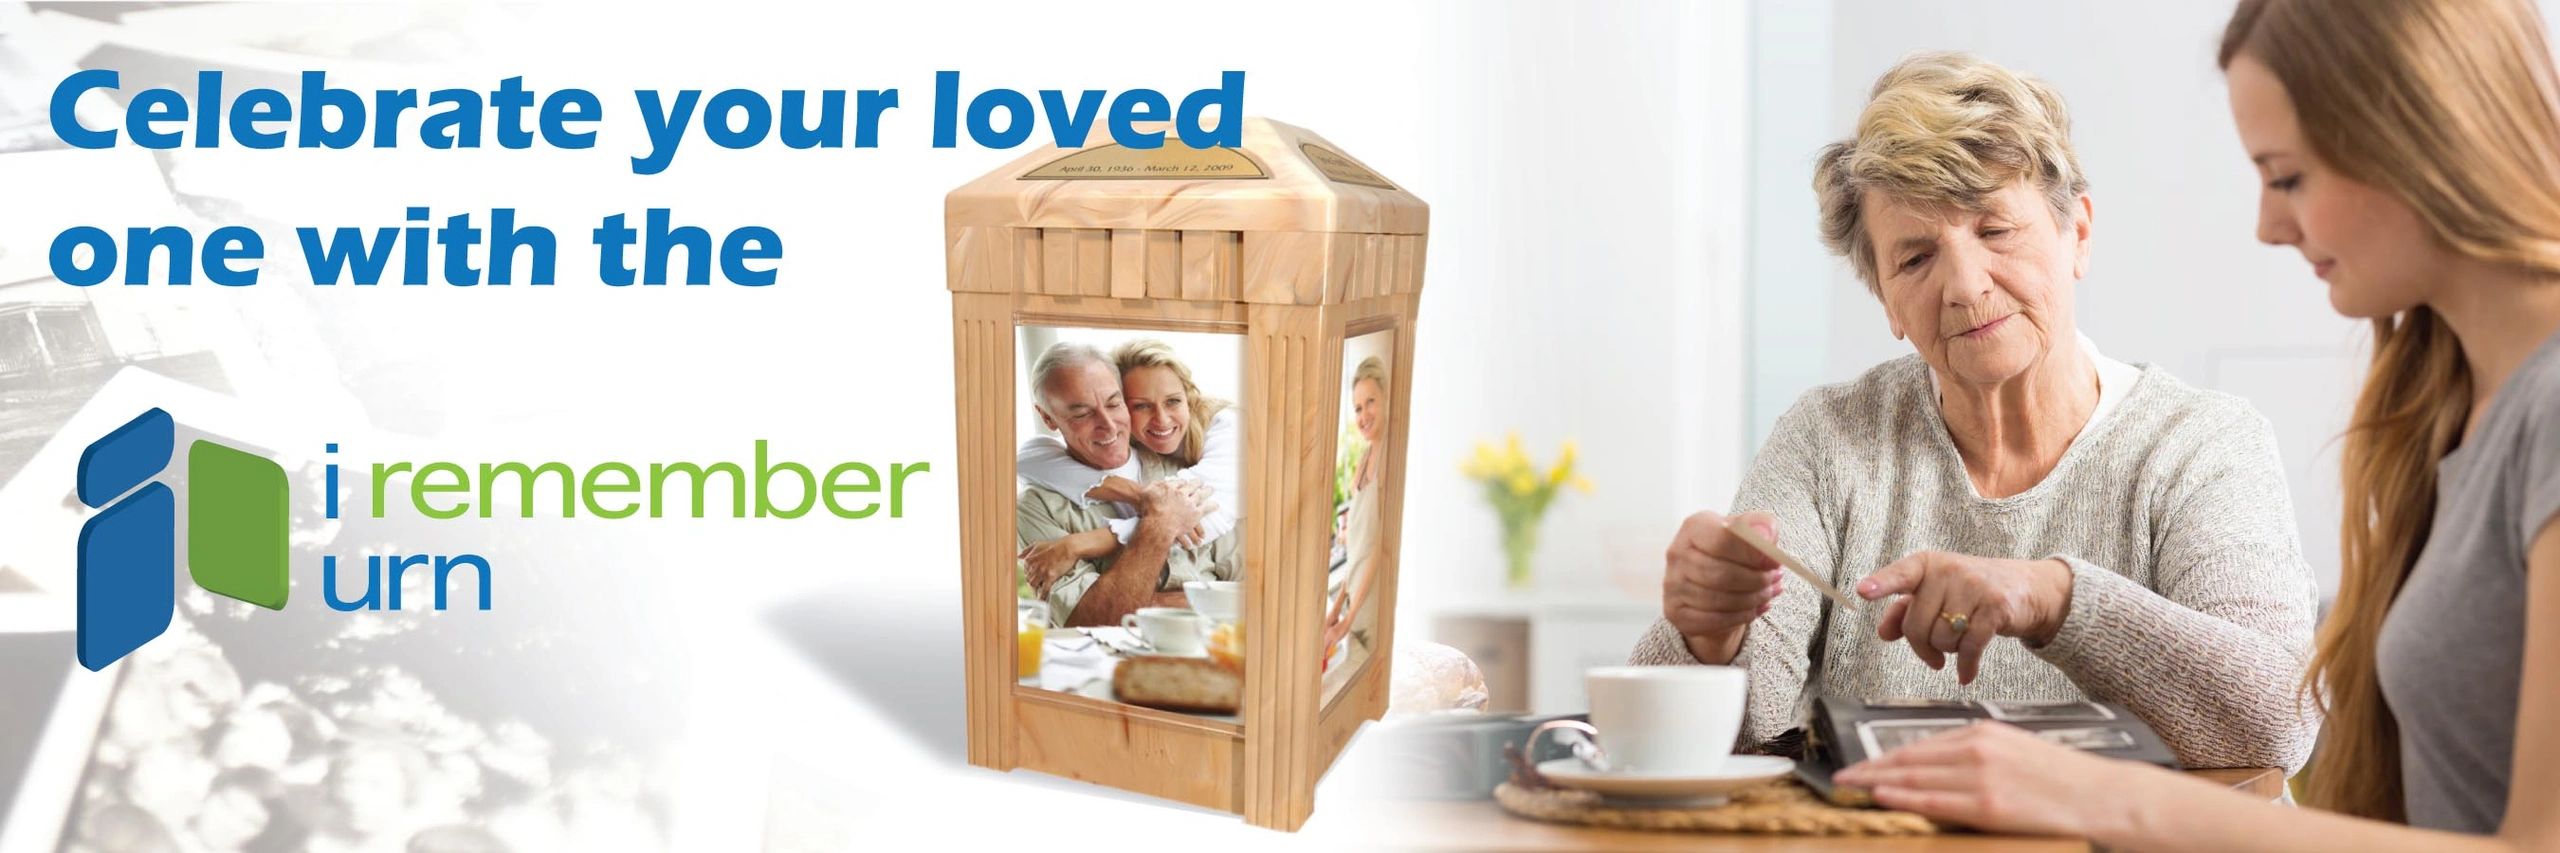 Celebrate your loved one with the I Remember Urn.